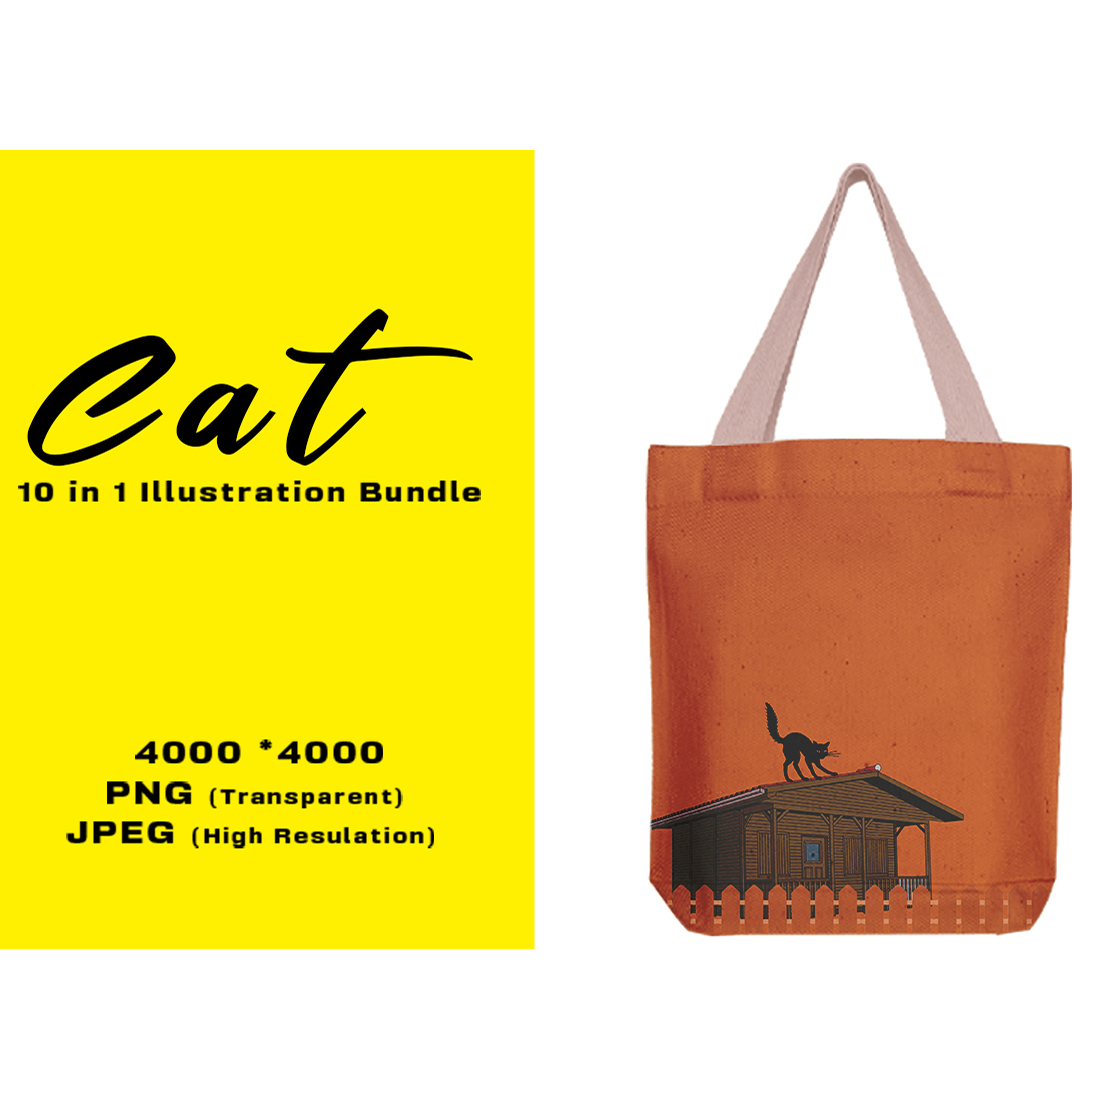 Image of bag with enchanting print with a cat on the roof